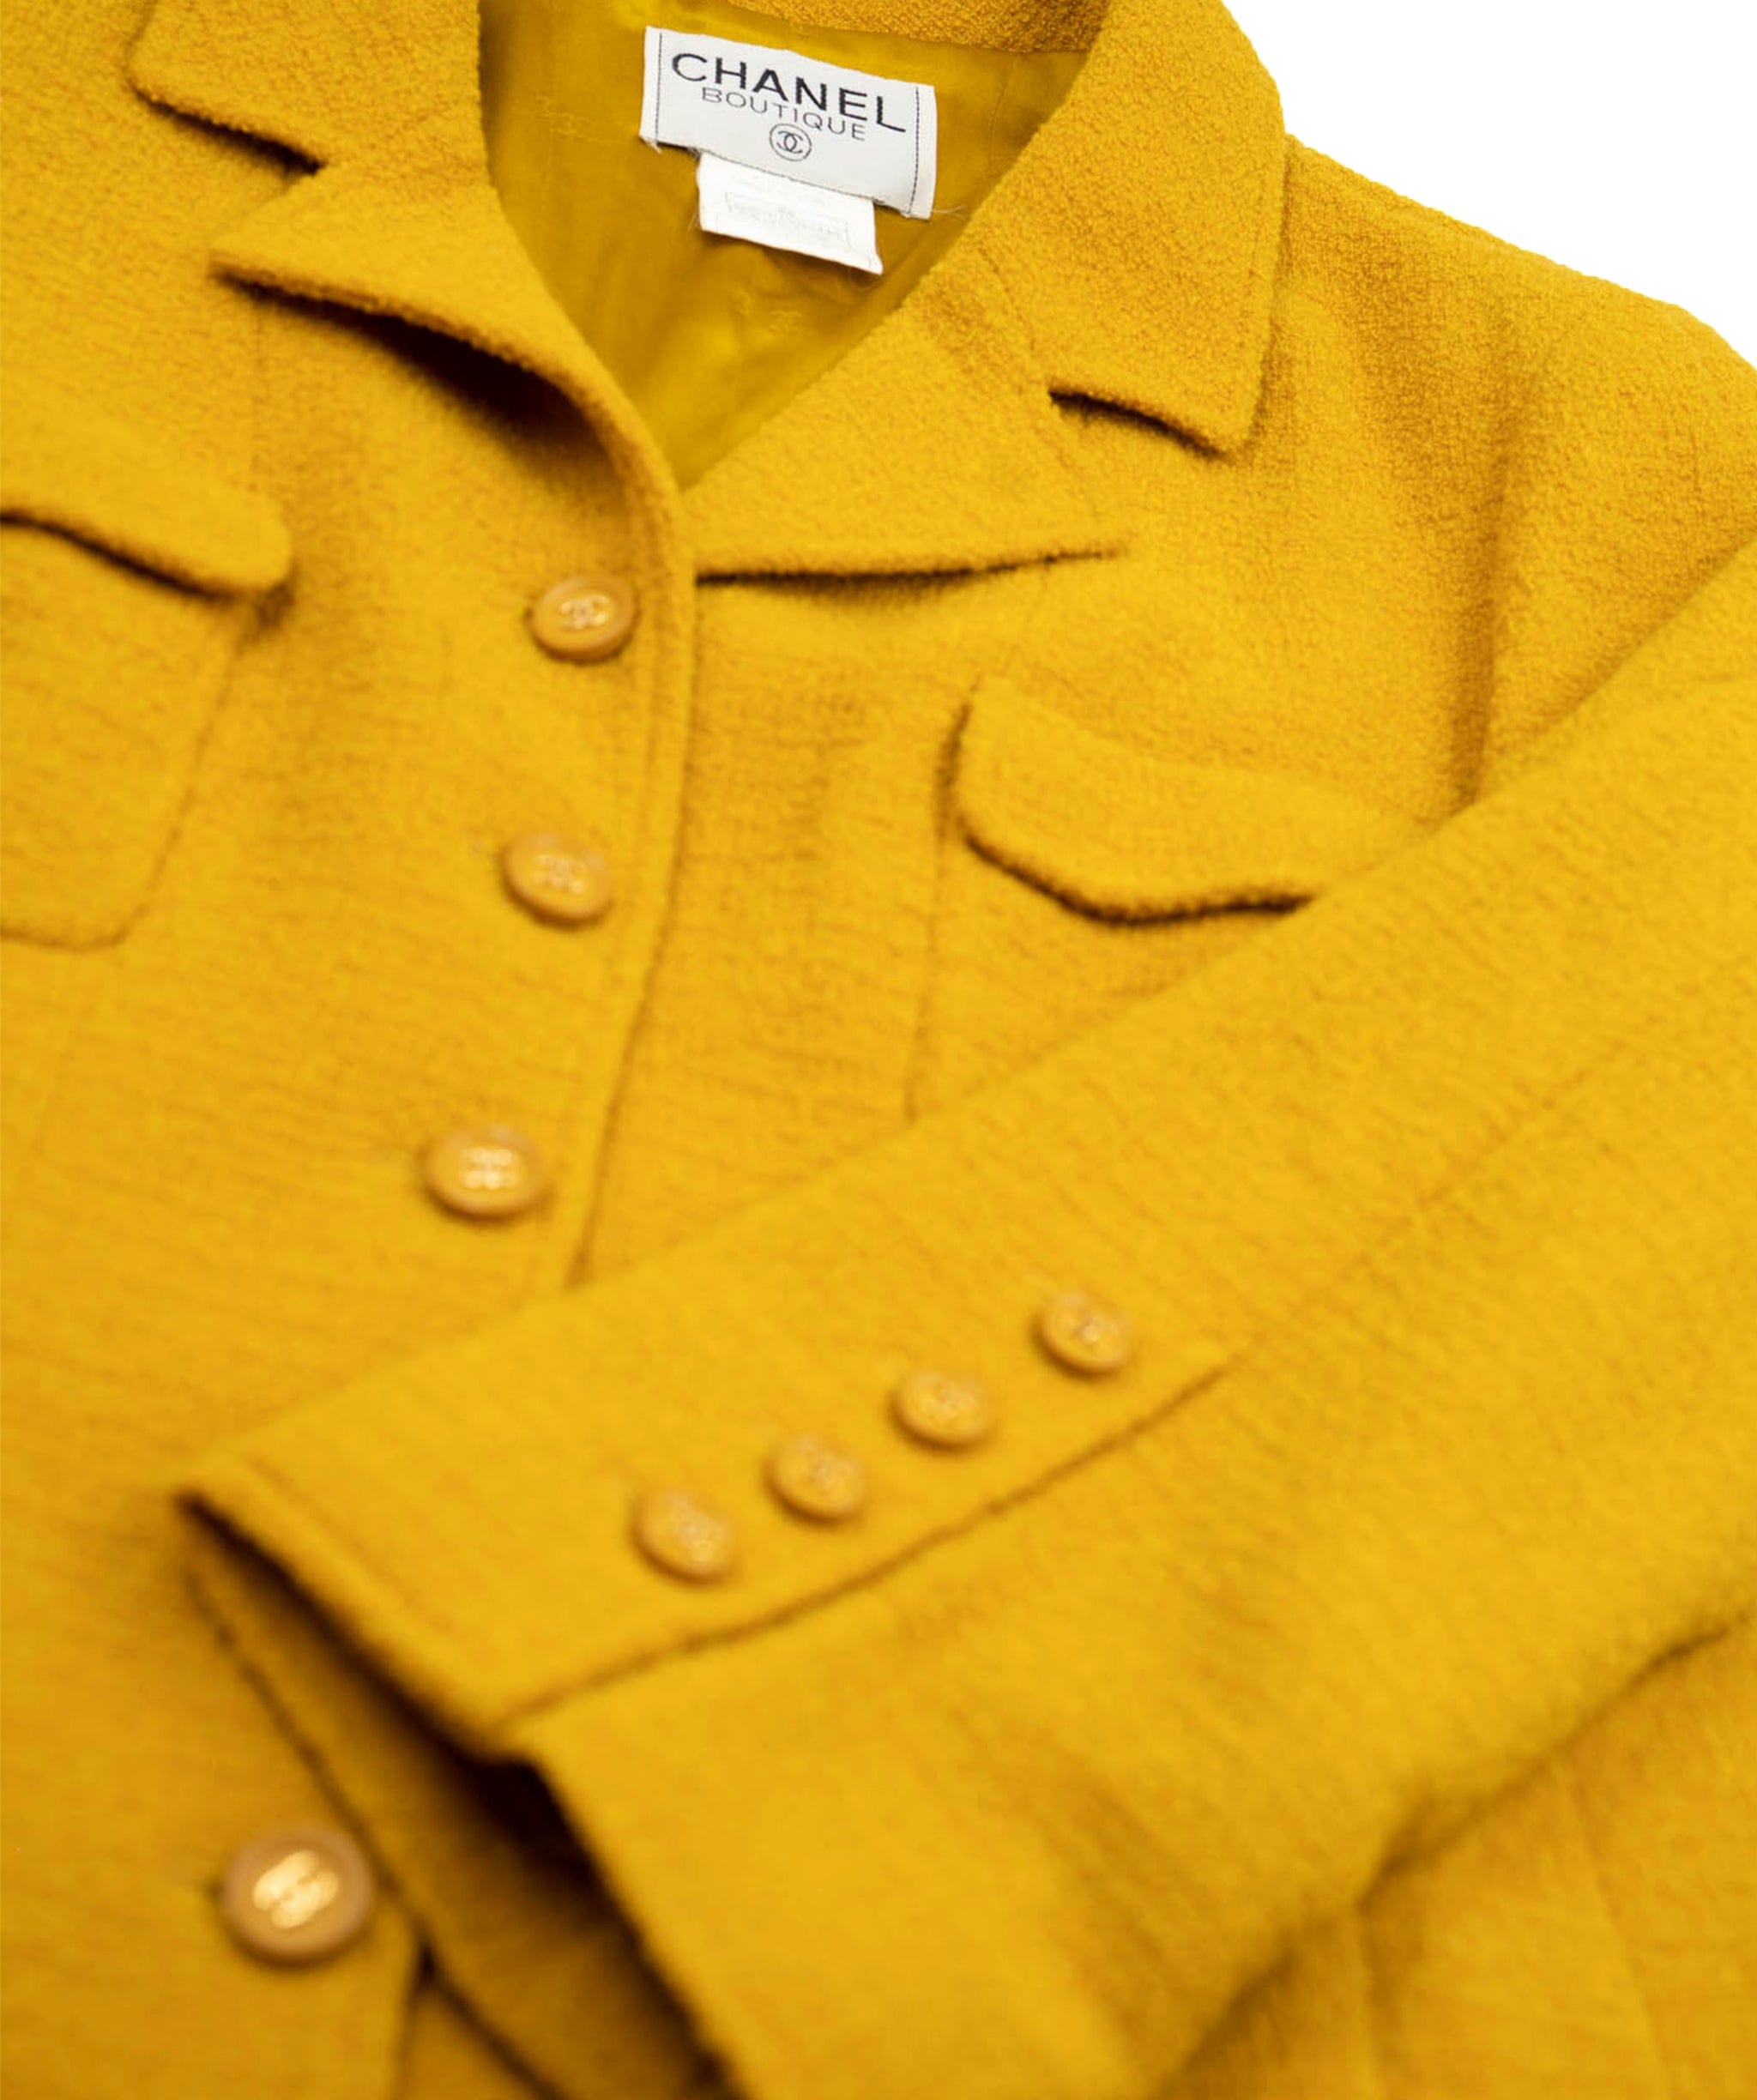 Chanel Chanel mustard yellow boucle jacket with round CC logo buttons, 95A AEL1083